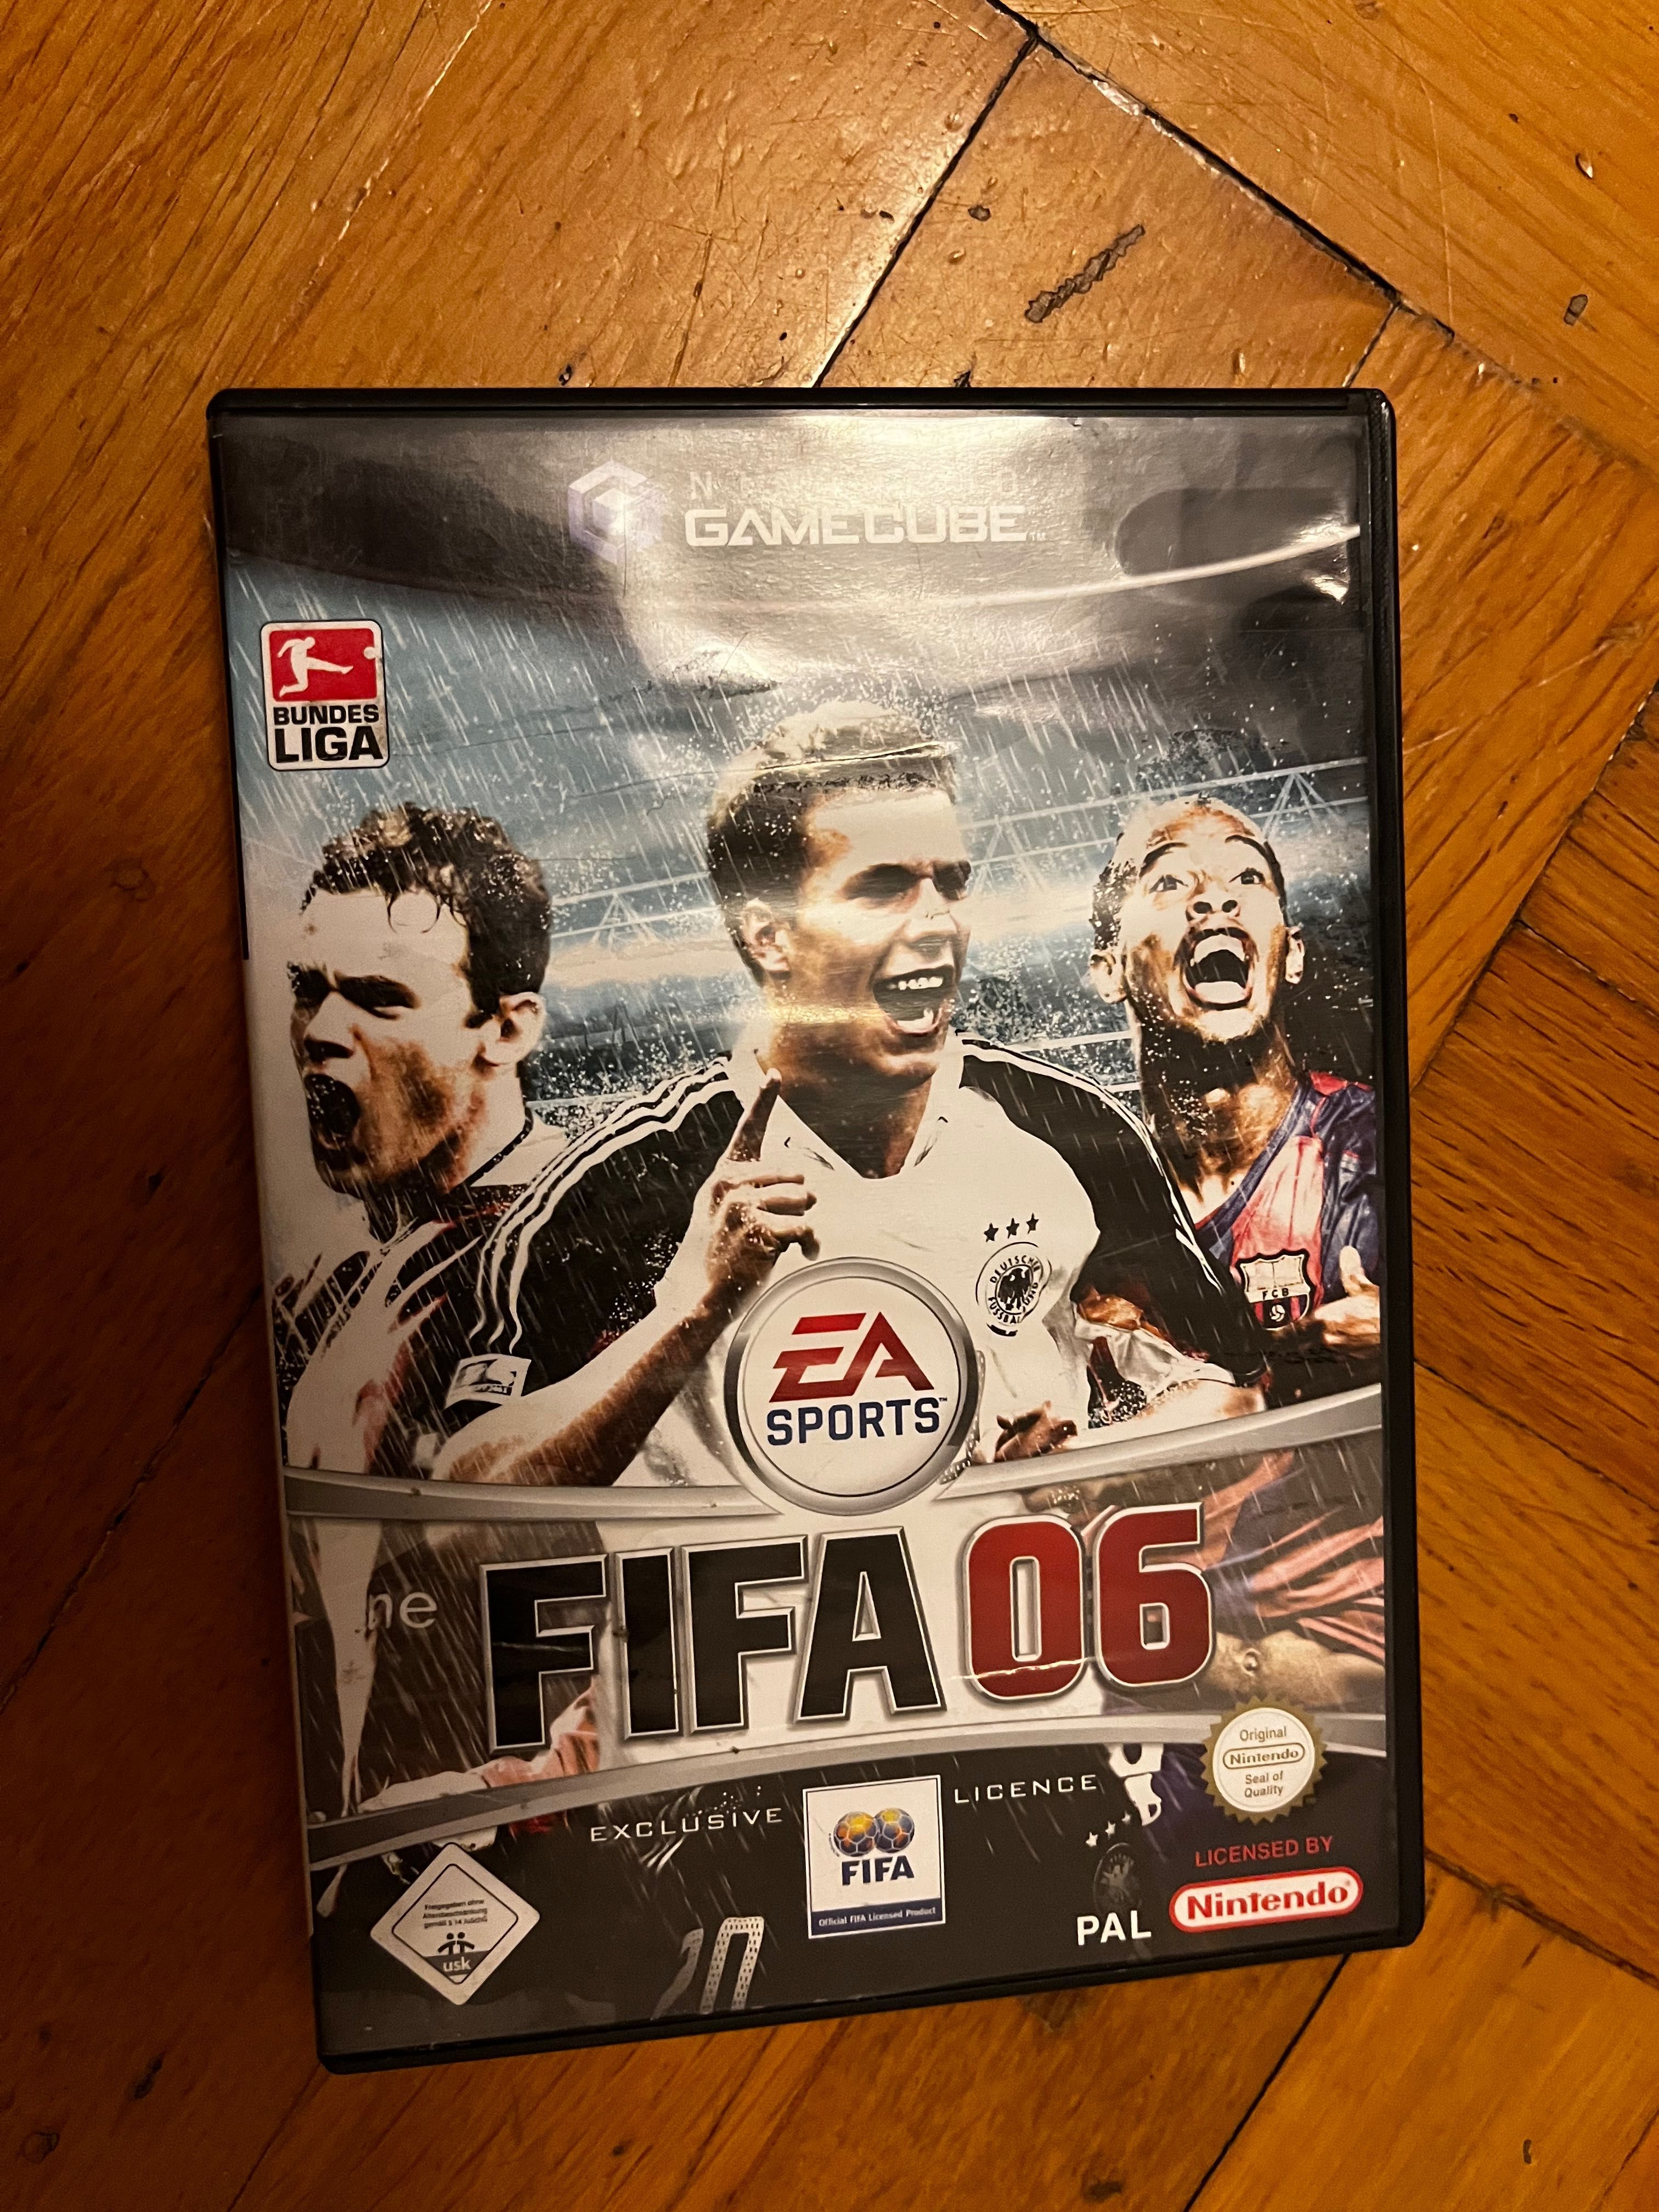 FIFA 06 game cube